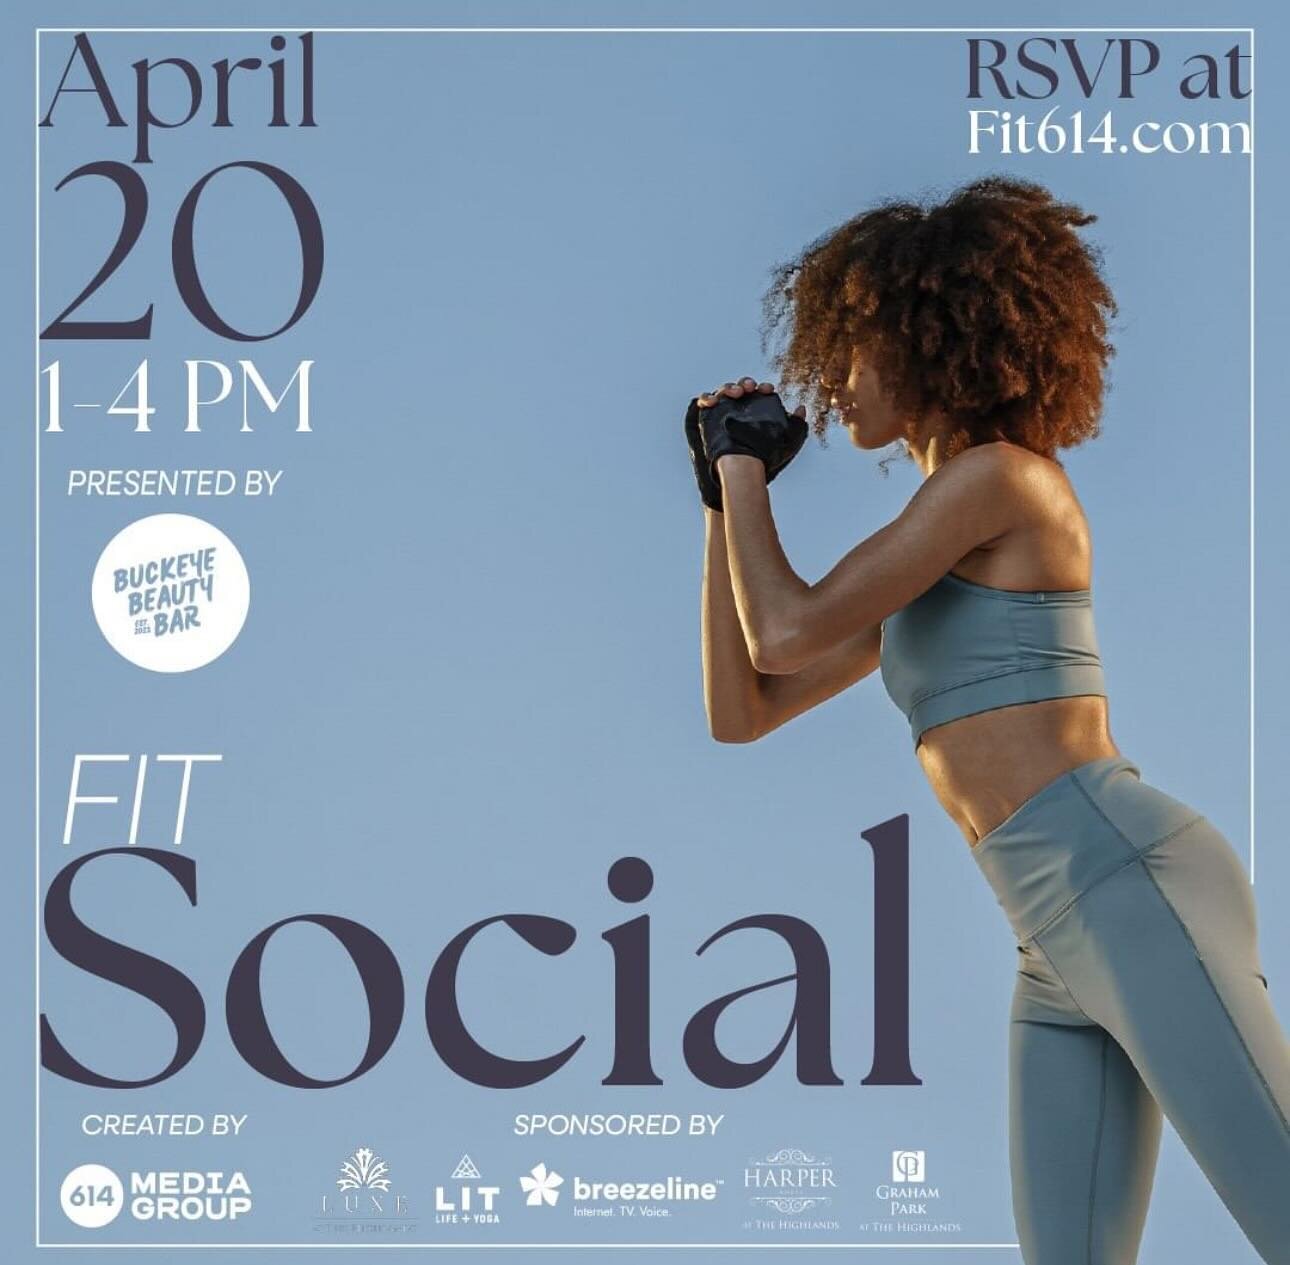 Don&rsquo;t miss @614magazine Fit Social on April 20th from 1-4pm at The Highlands!

Enjoy an ultimate health and wellness experience from Columbus&rsquo;s best fitness studios, health and beauty retailers, spas, salons and more!

Visit Fit614.com to